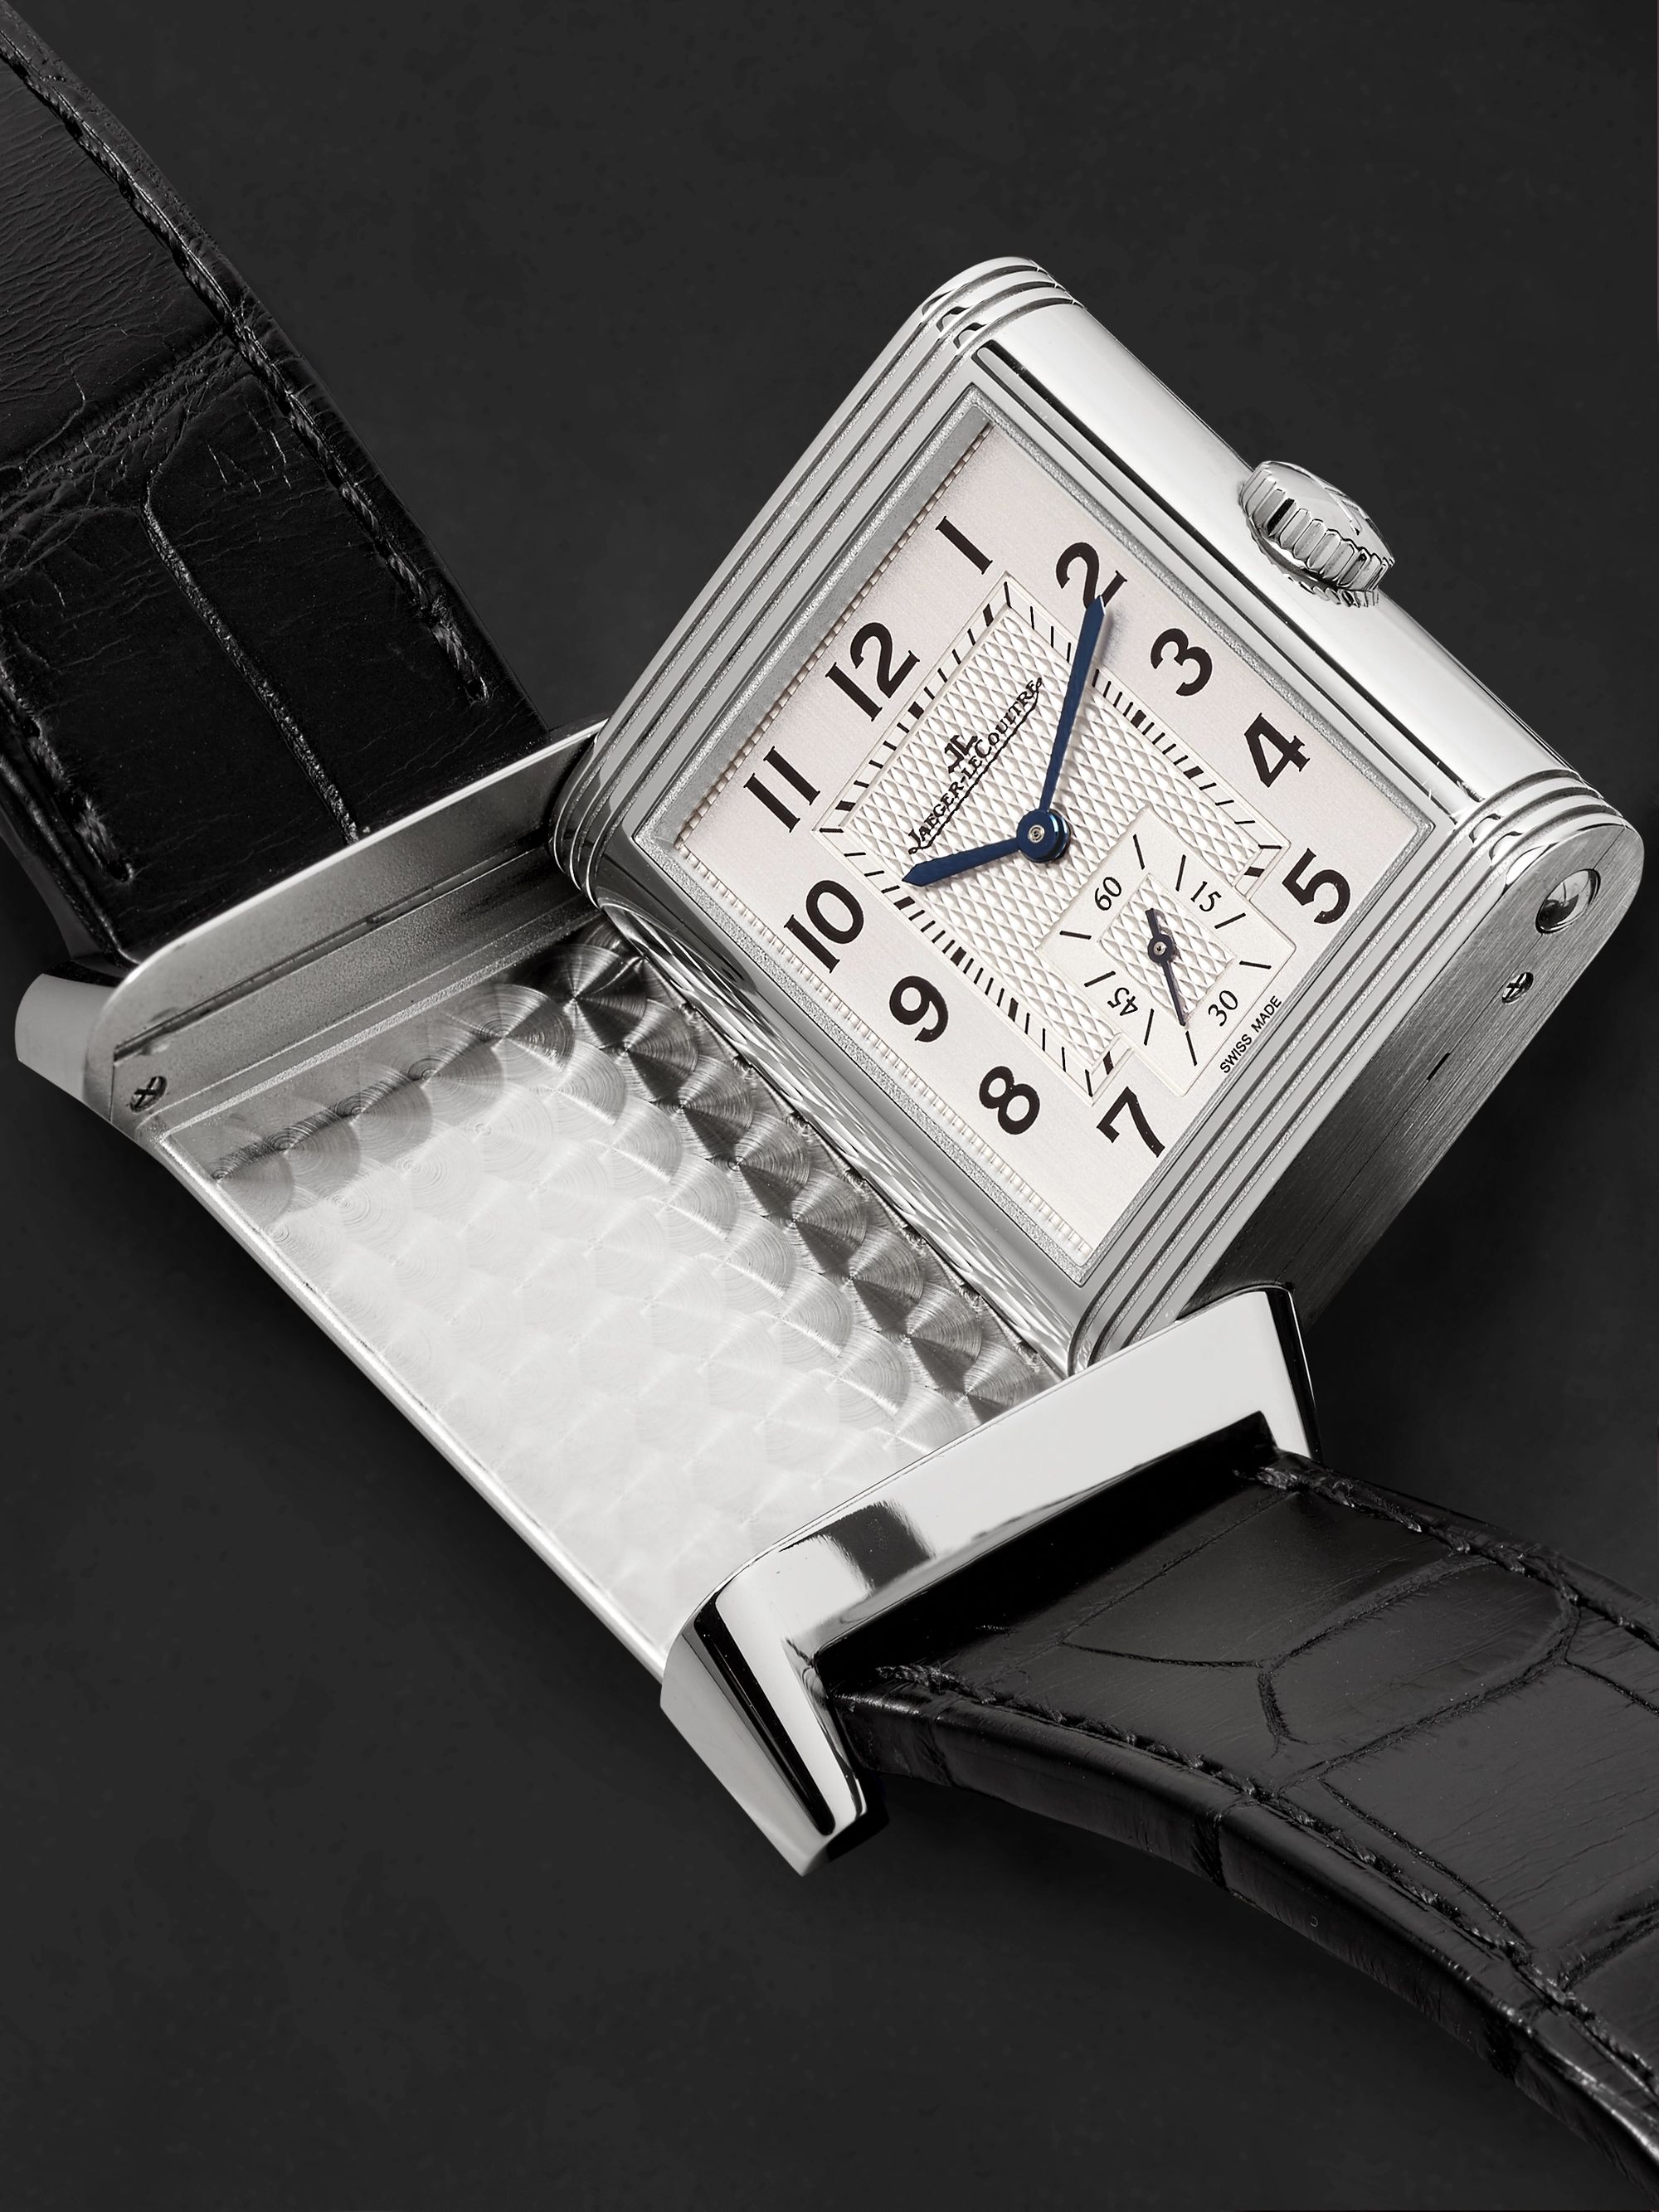 JAEGER-LECOULTRE Reverso Classic Large Duoface Hand-Wound 47mm x 28mm Stainless Steel and Leather Watch, Ref. No. JLQ3848420